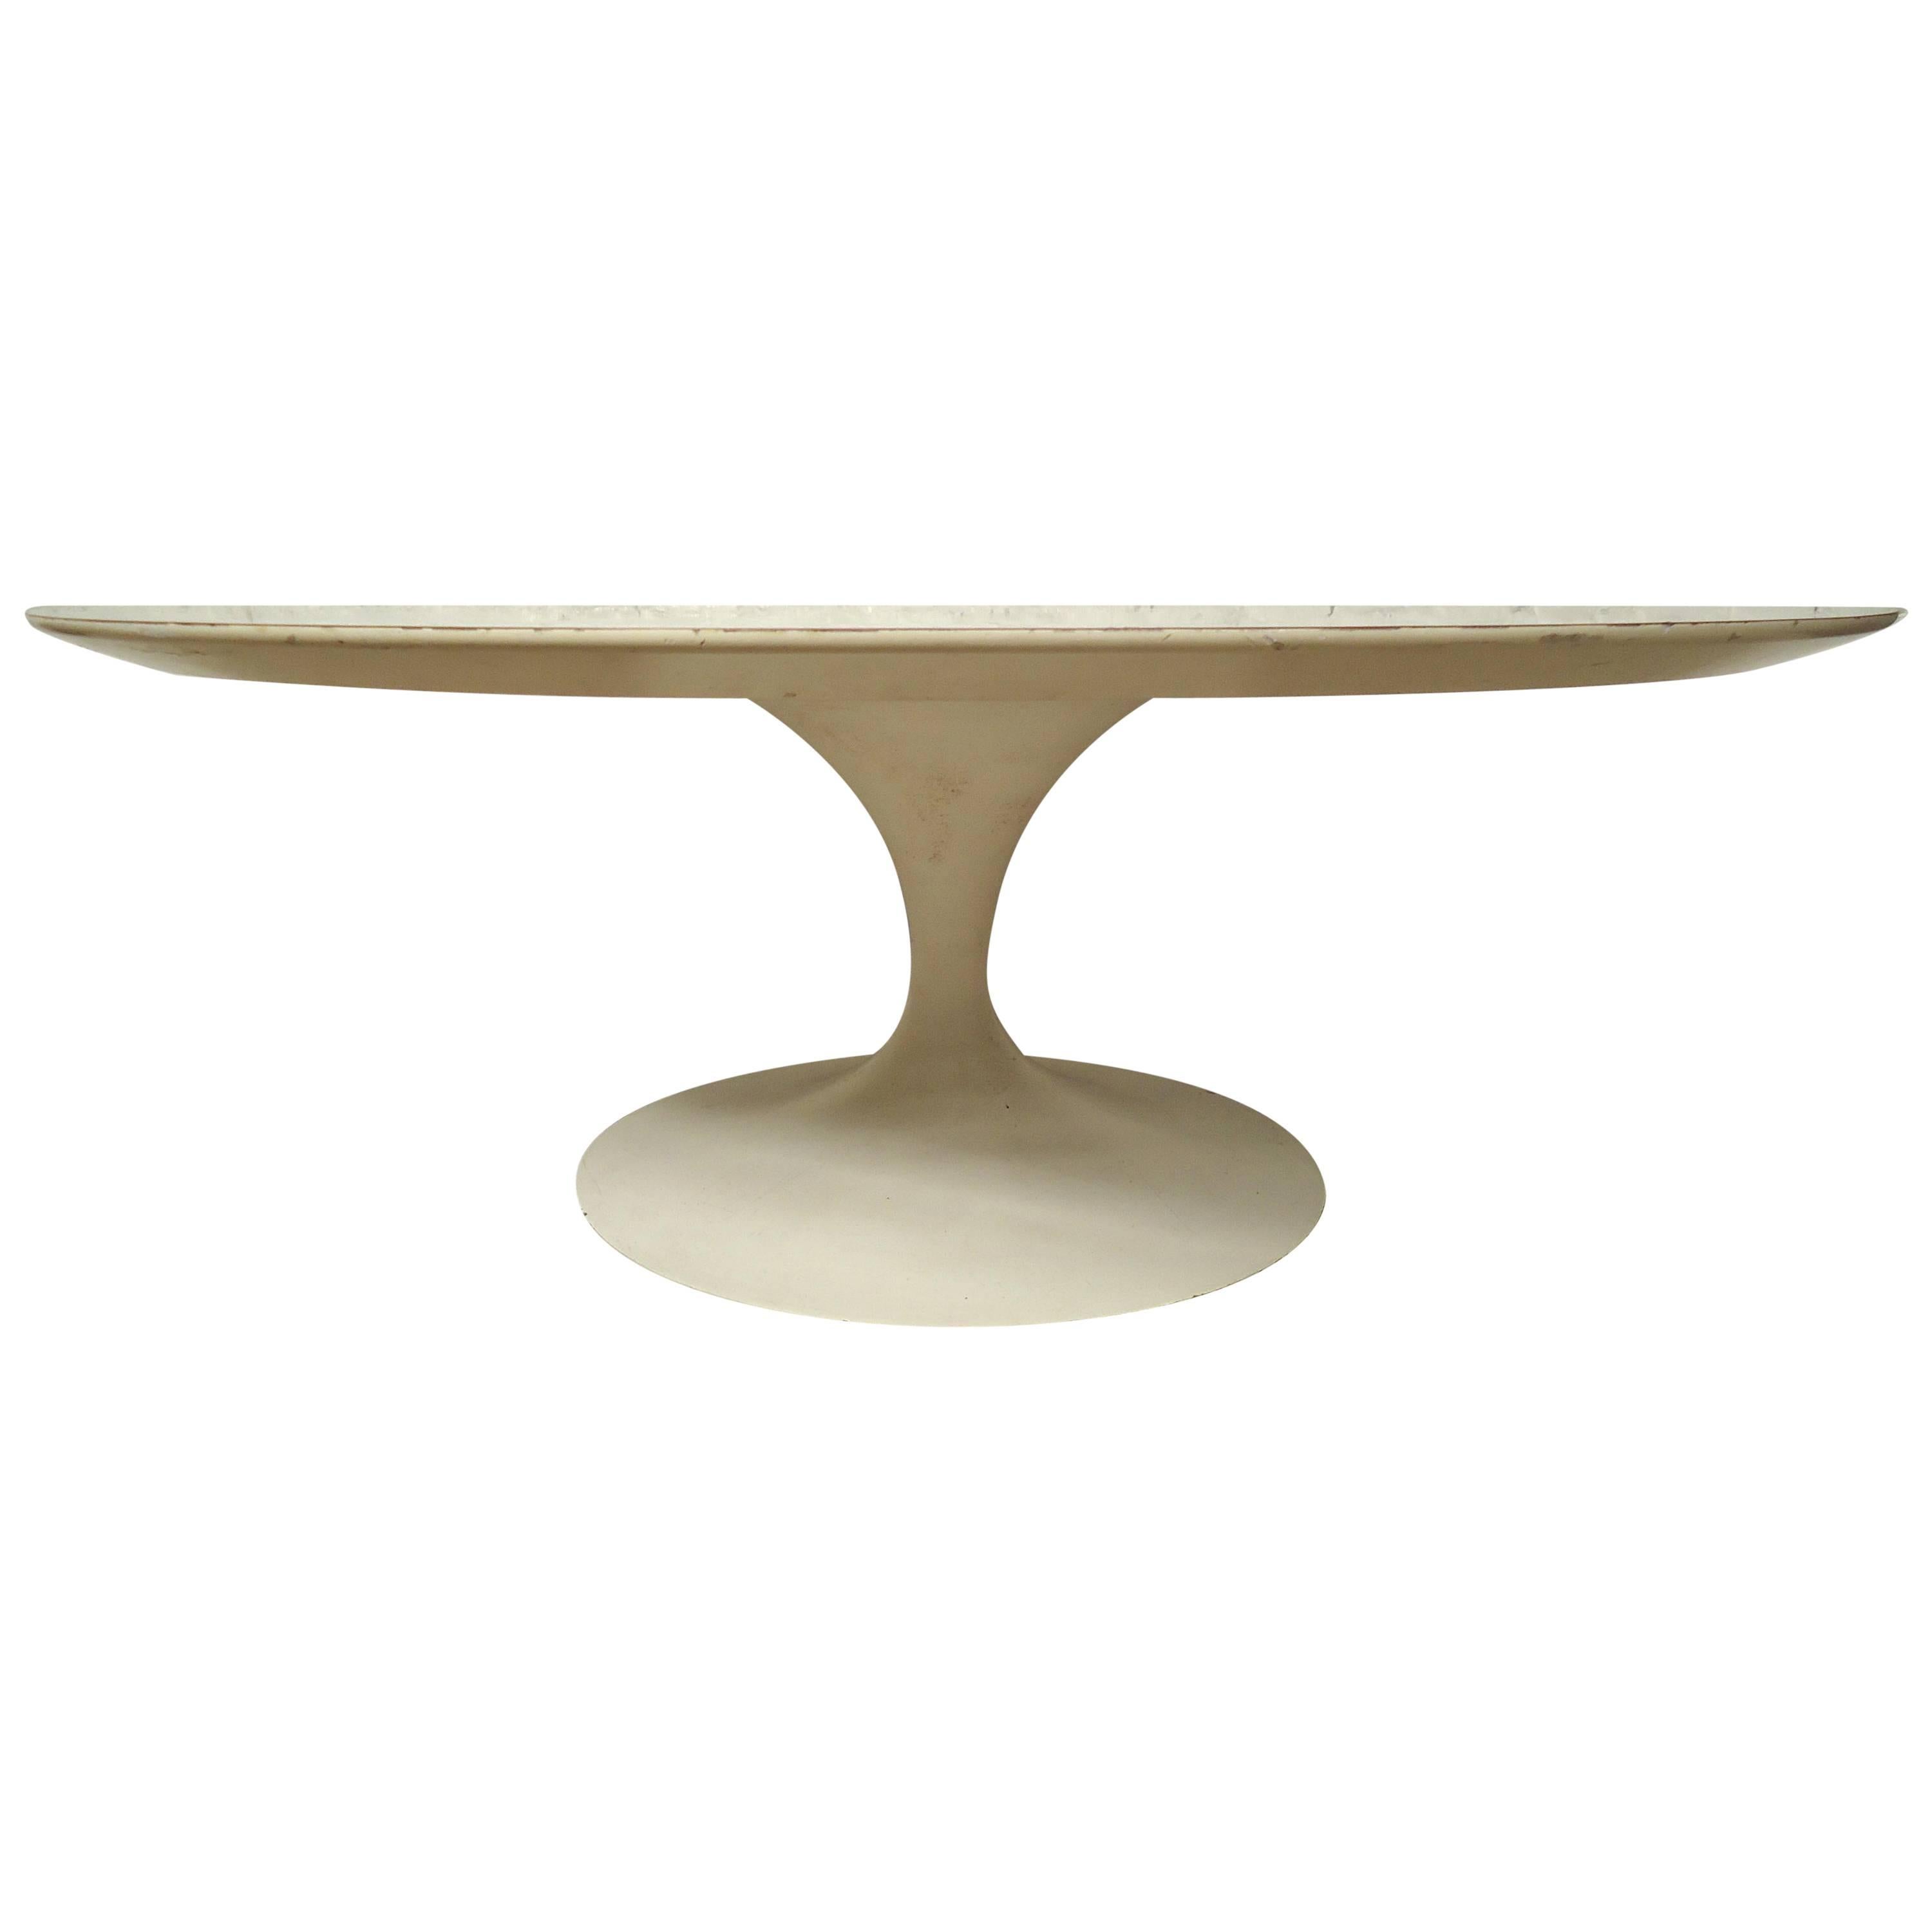 Vintage-modern tulip style coffee table designed for Knoll.

Please confirm item location NY or NJ with dealer.